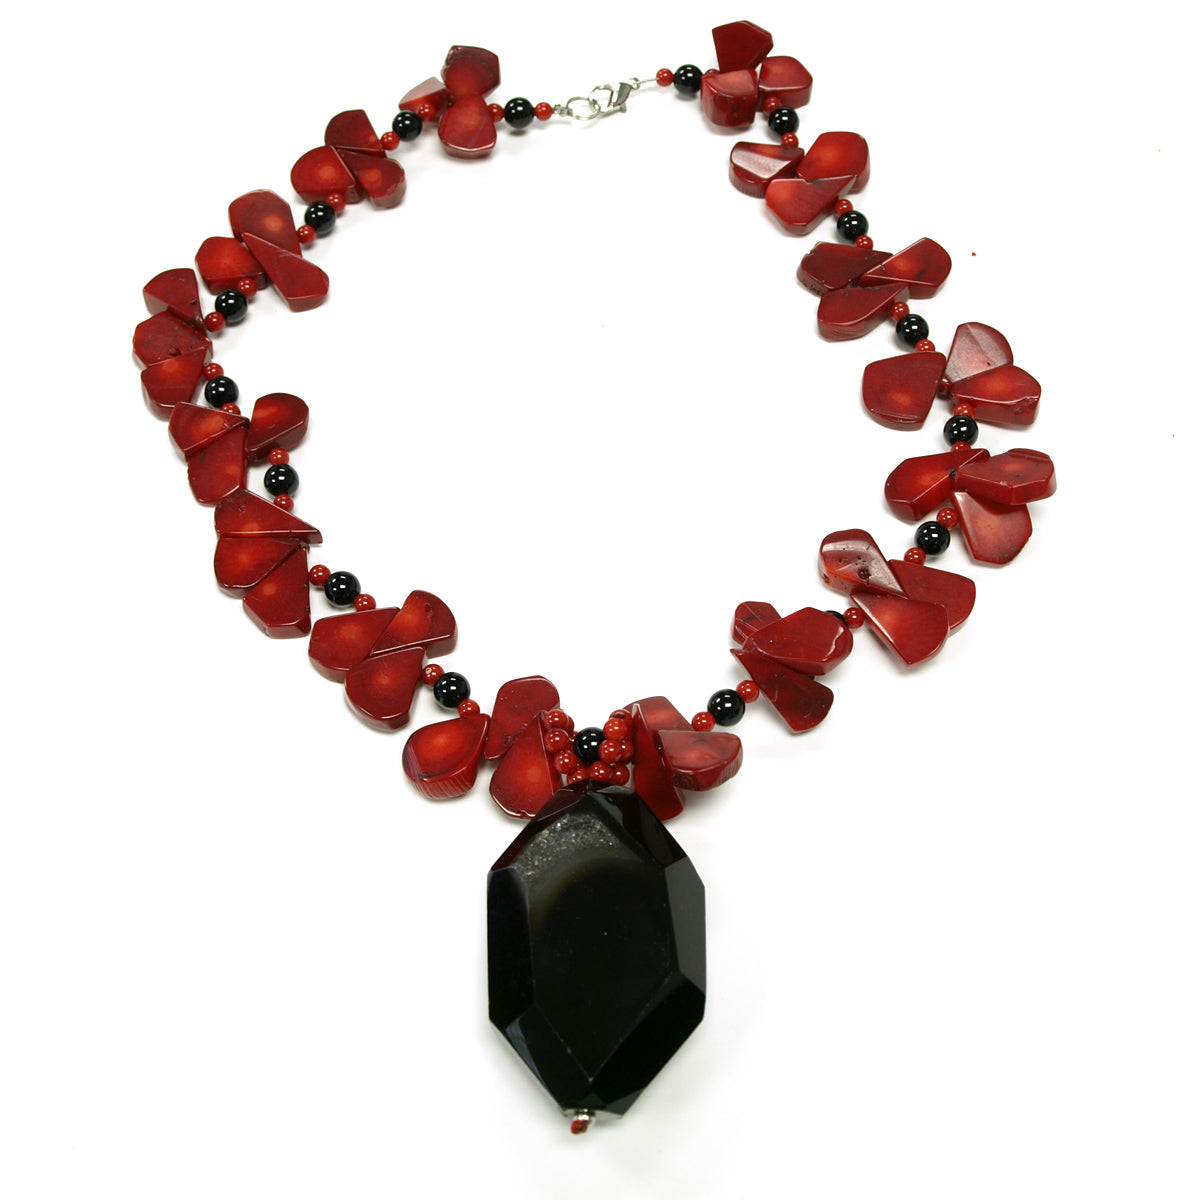 Red Coral and Black Agate Pendant Necklace, Earrings, Bracelet Jewelry Set, 17 inches